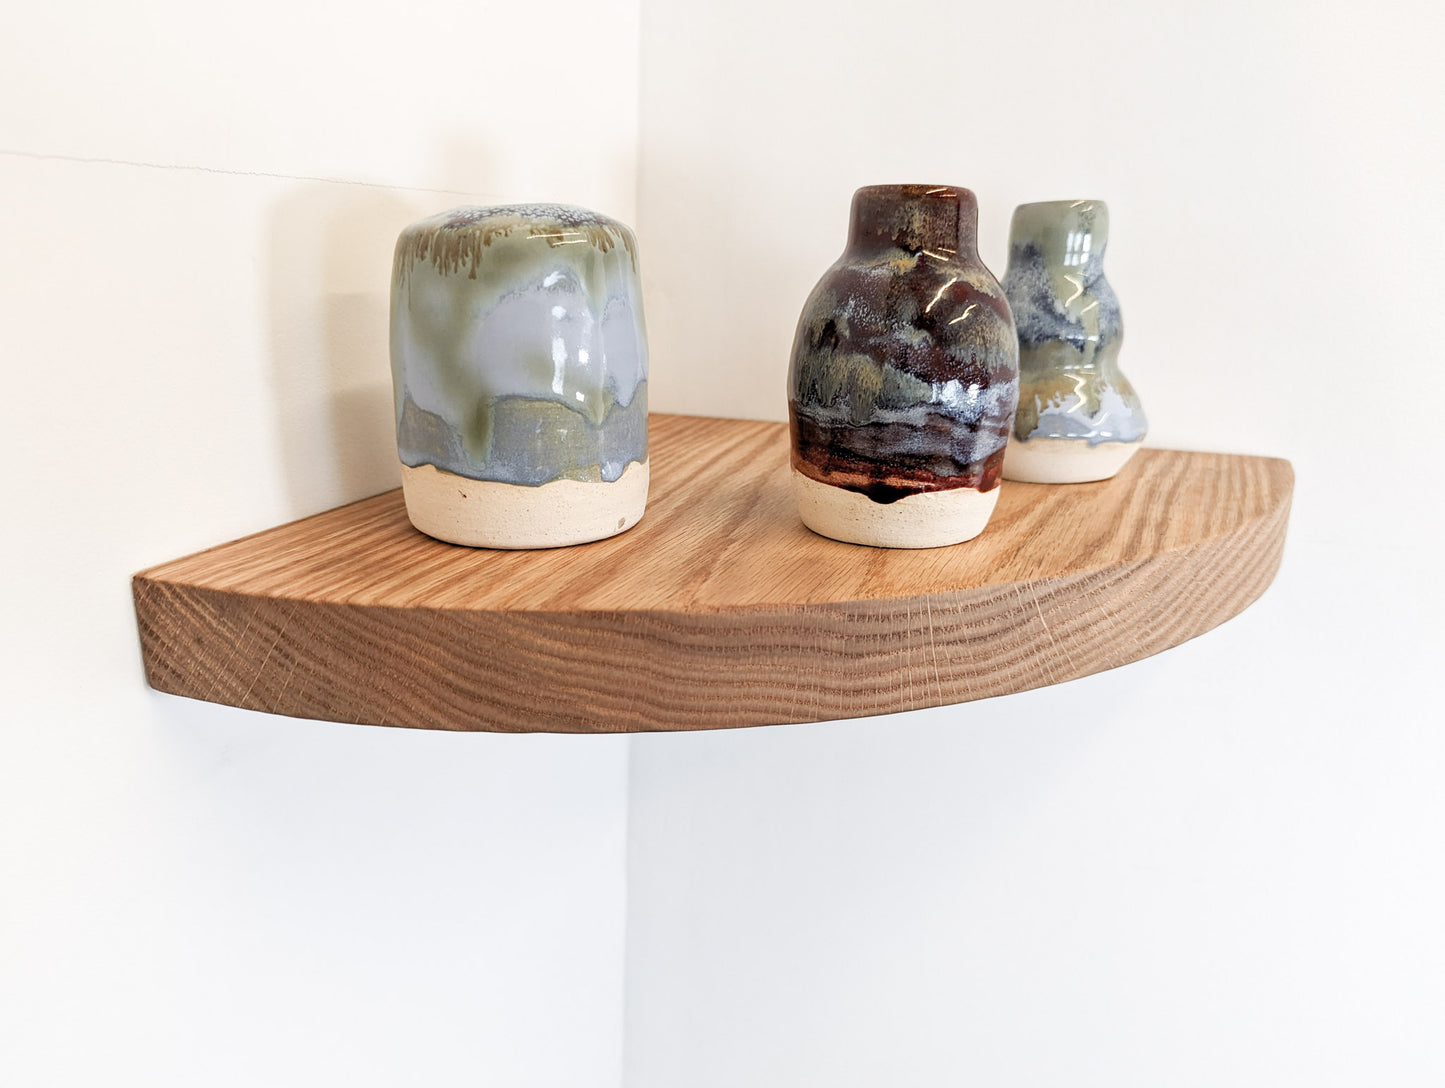 Three vases are displayed on top of an oak corner floating shelf with a rounded front face.